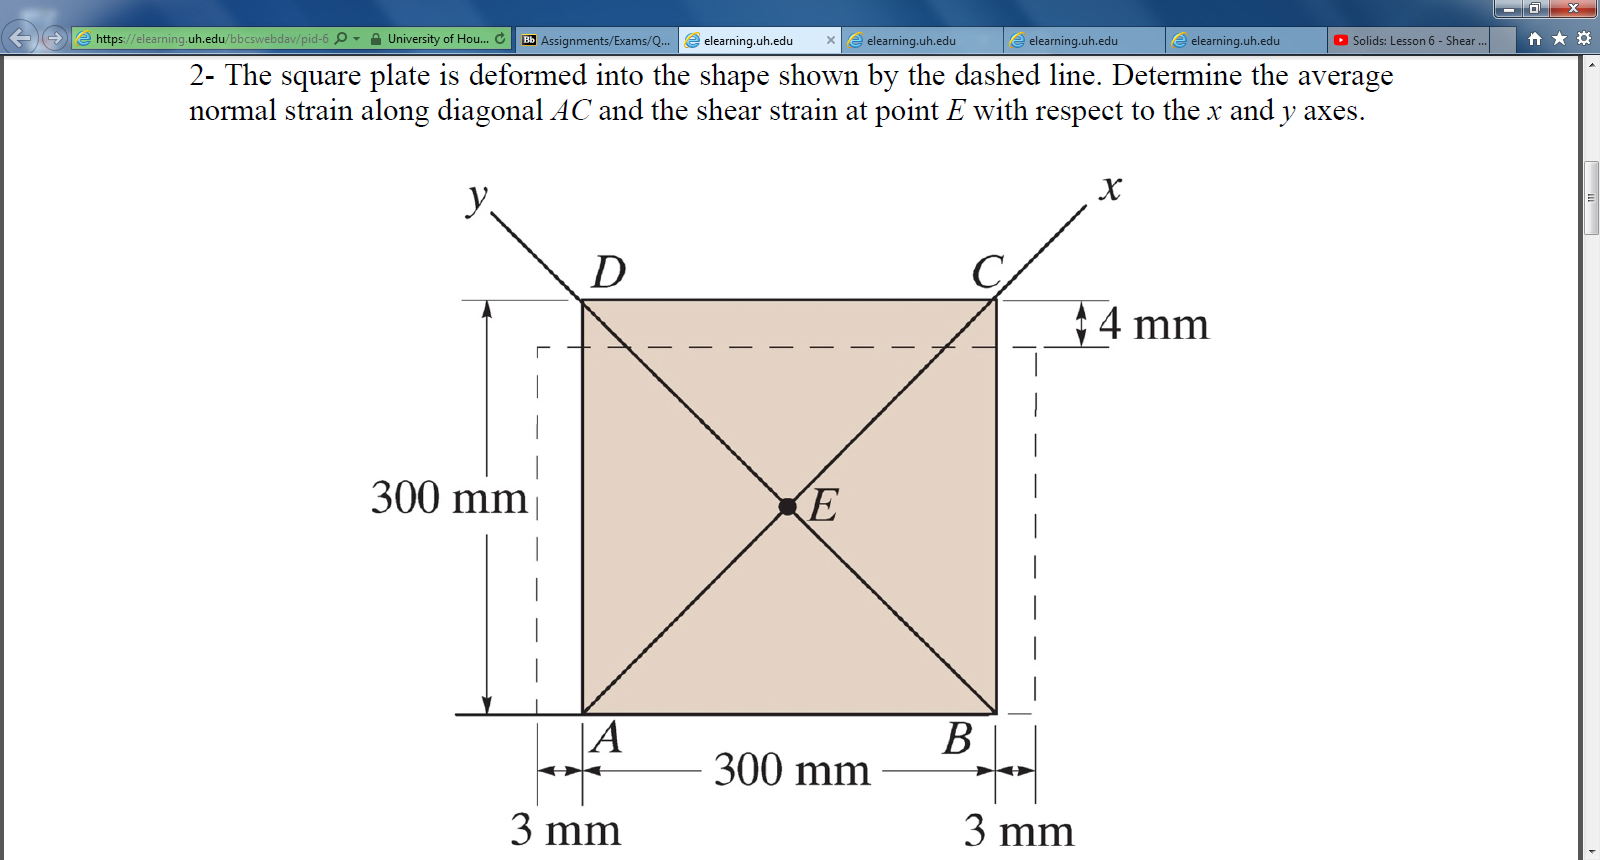 https://elearning.uh.edu/bbcswebdav/pid-6 O - A University of Hou.. C
Solids: Lesson 6 - Shear ..
e elearning.uh.edu
e elearning.uh.edu
Bb Assignments/Exams/Q.
e elearning.uh.edu
elearning.uh.edu
2- The square plate is deformed into the shape shown by the dashed line. Determine the average
normal strain along diagonal AC and the shear strain at point E with respect to the x and y axes.
х
У
$4 mm
300 mm|
KE
|A
300 mm
3 mm
3 mm
